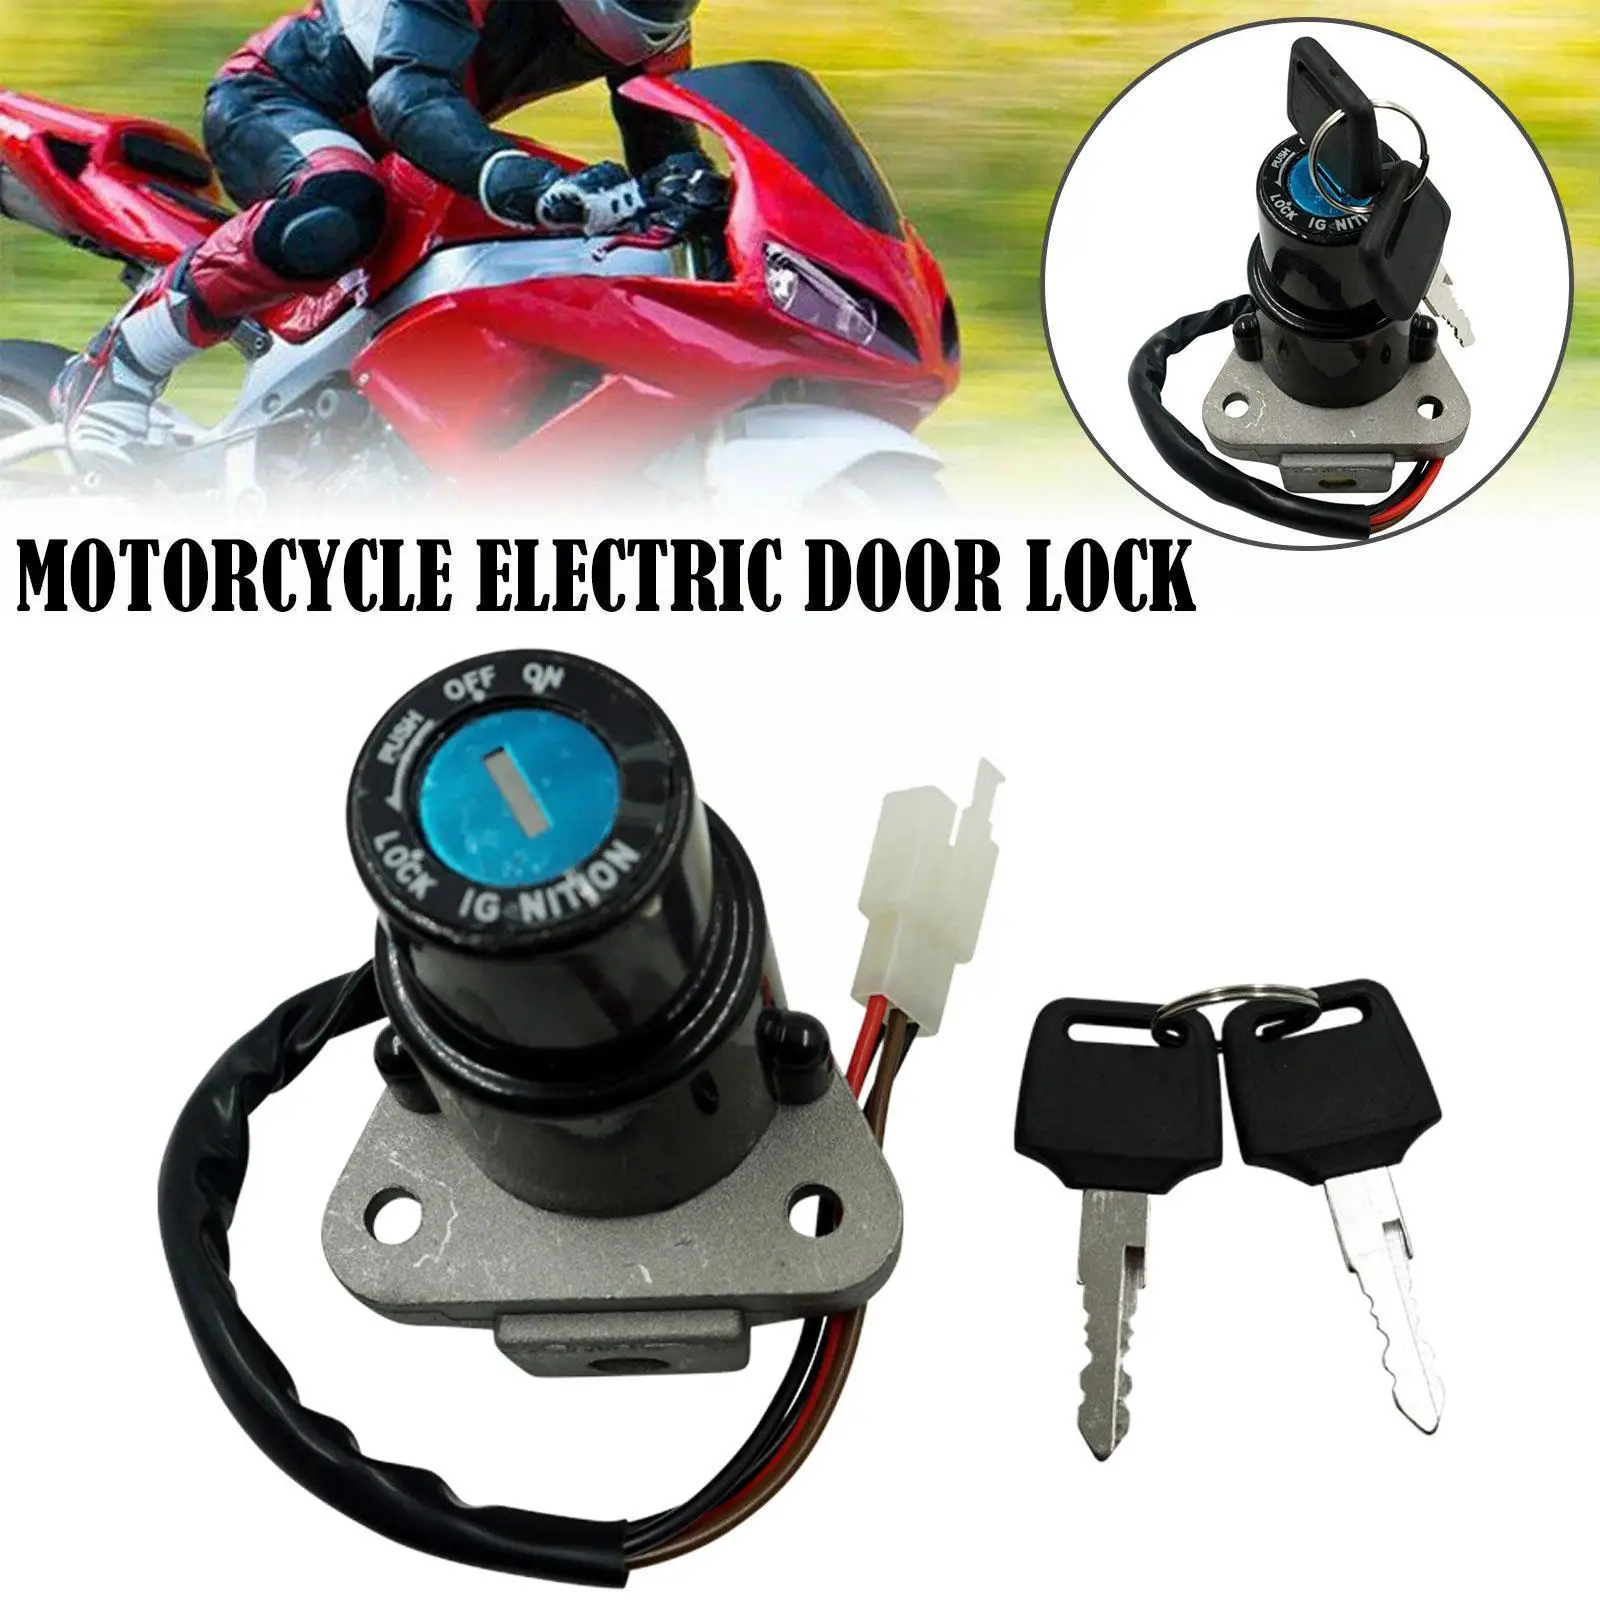 

Universal Motorcycle Motorbike Ignition Switch Key Electric Door Lock Fit for YAMAHA DT125 TW225 ATV Moto Accessories with R2V1